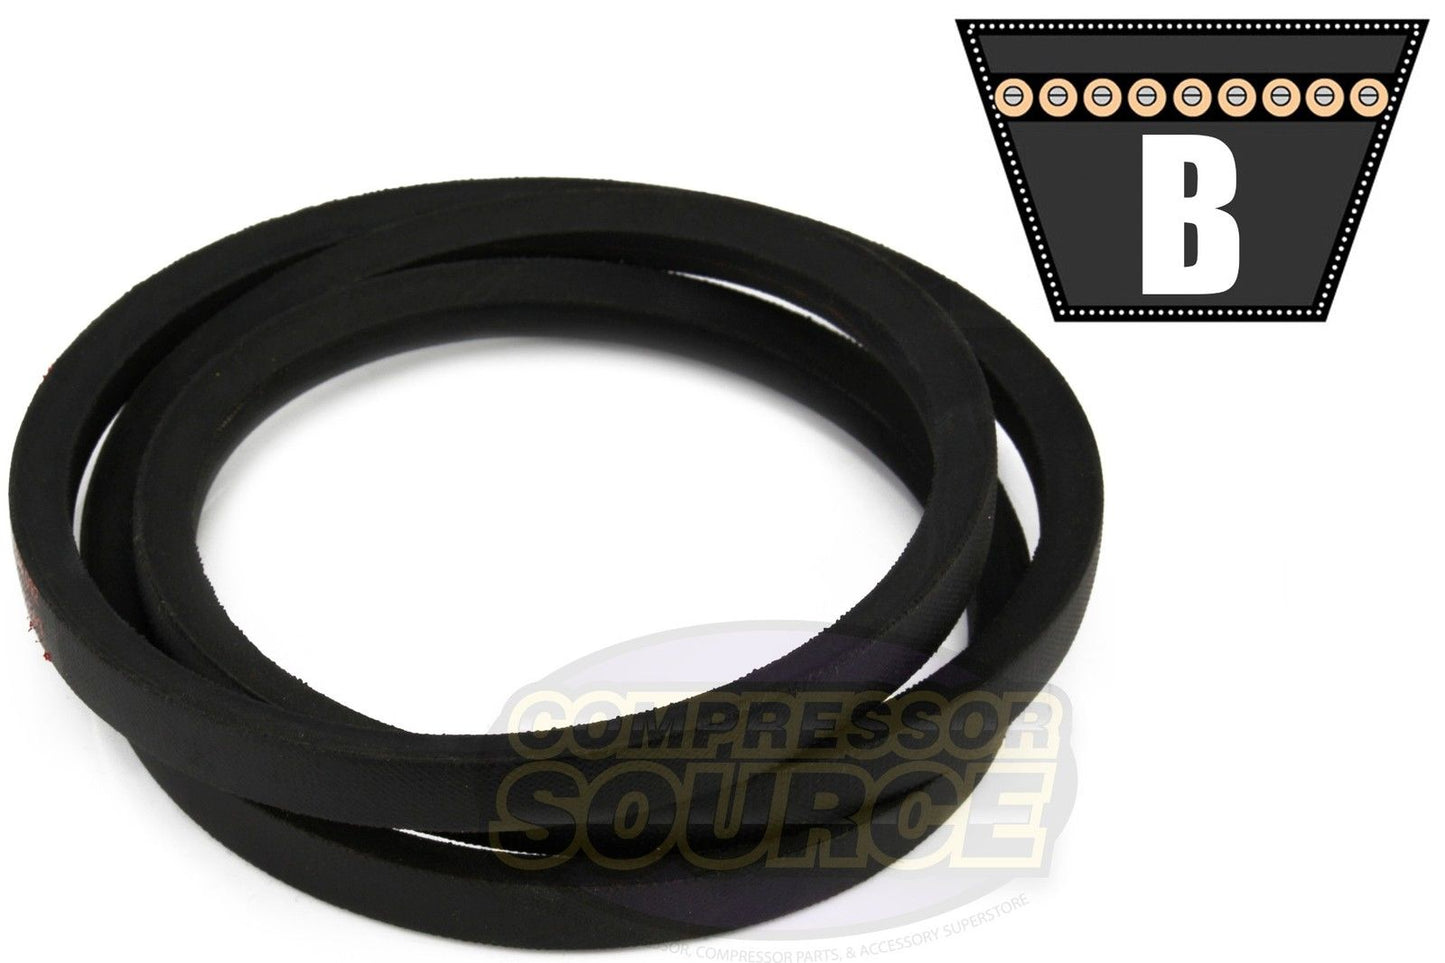 B87 Replacement High Quality Industrial & Lawn Mower 5/8" x 90" V Belt 5L900